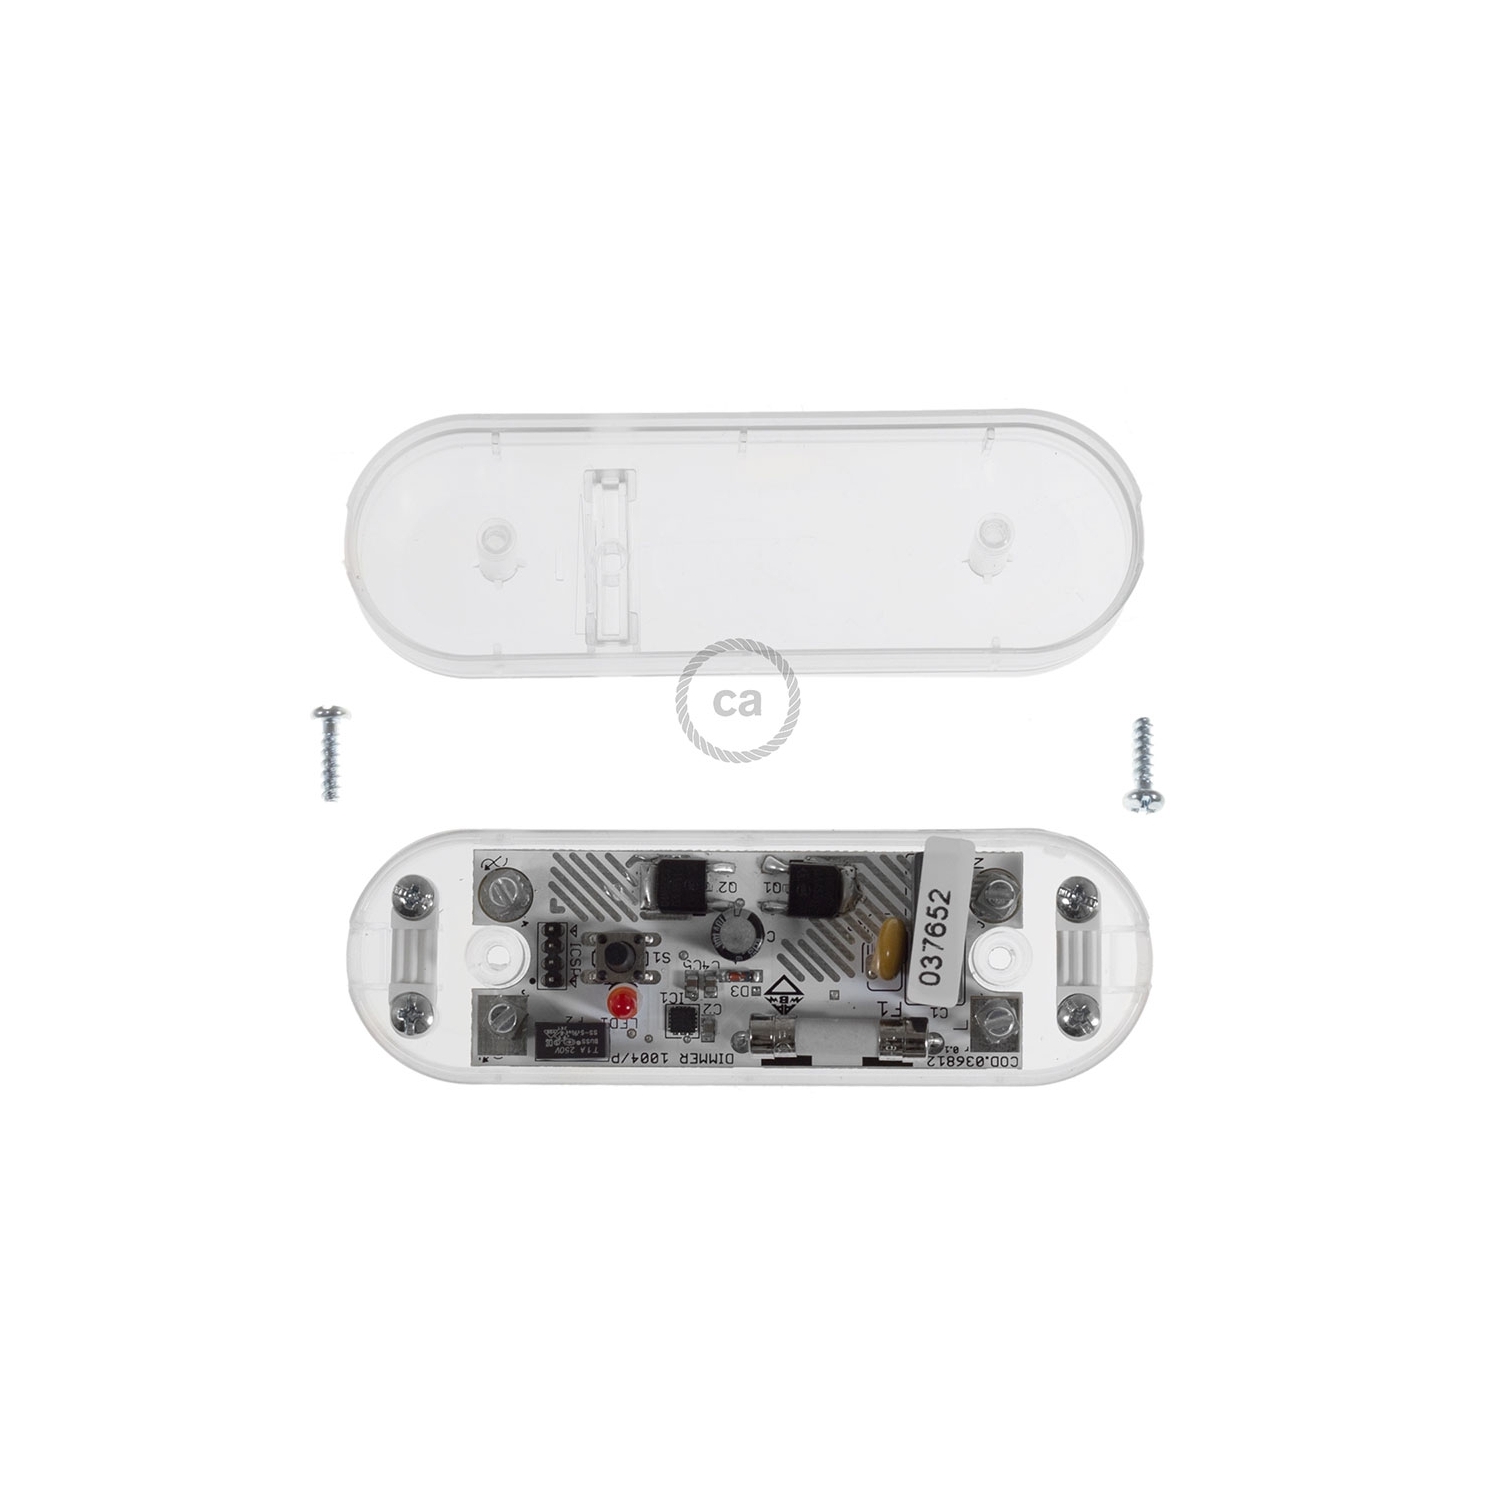 Clear inline dimmer switch